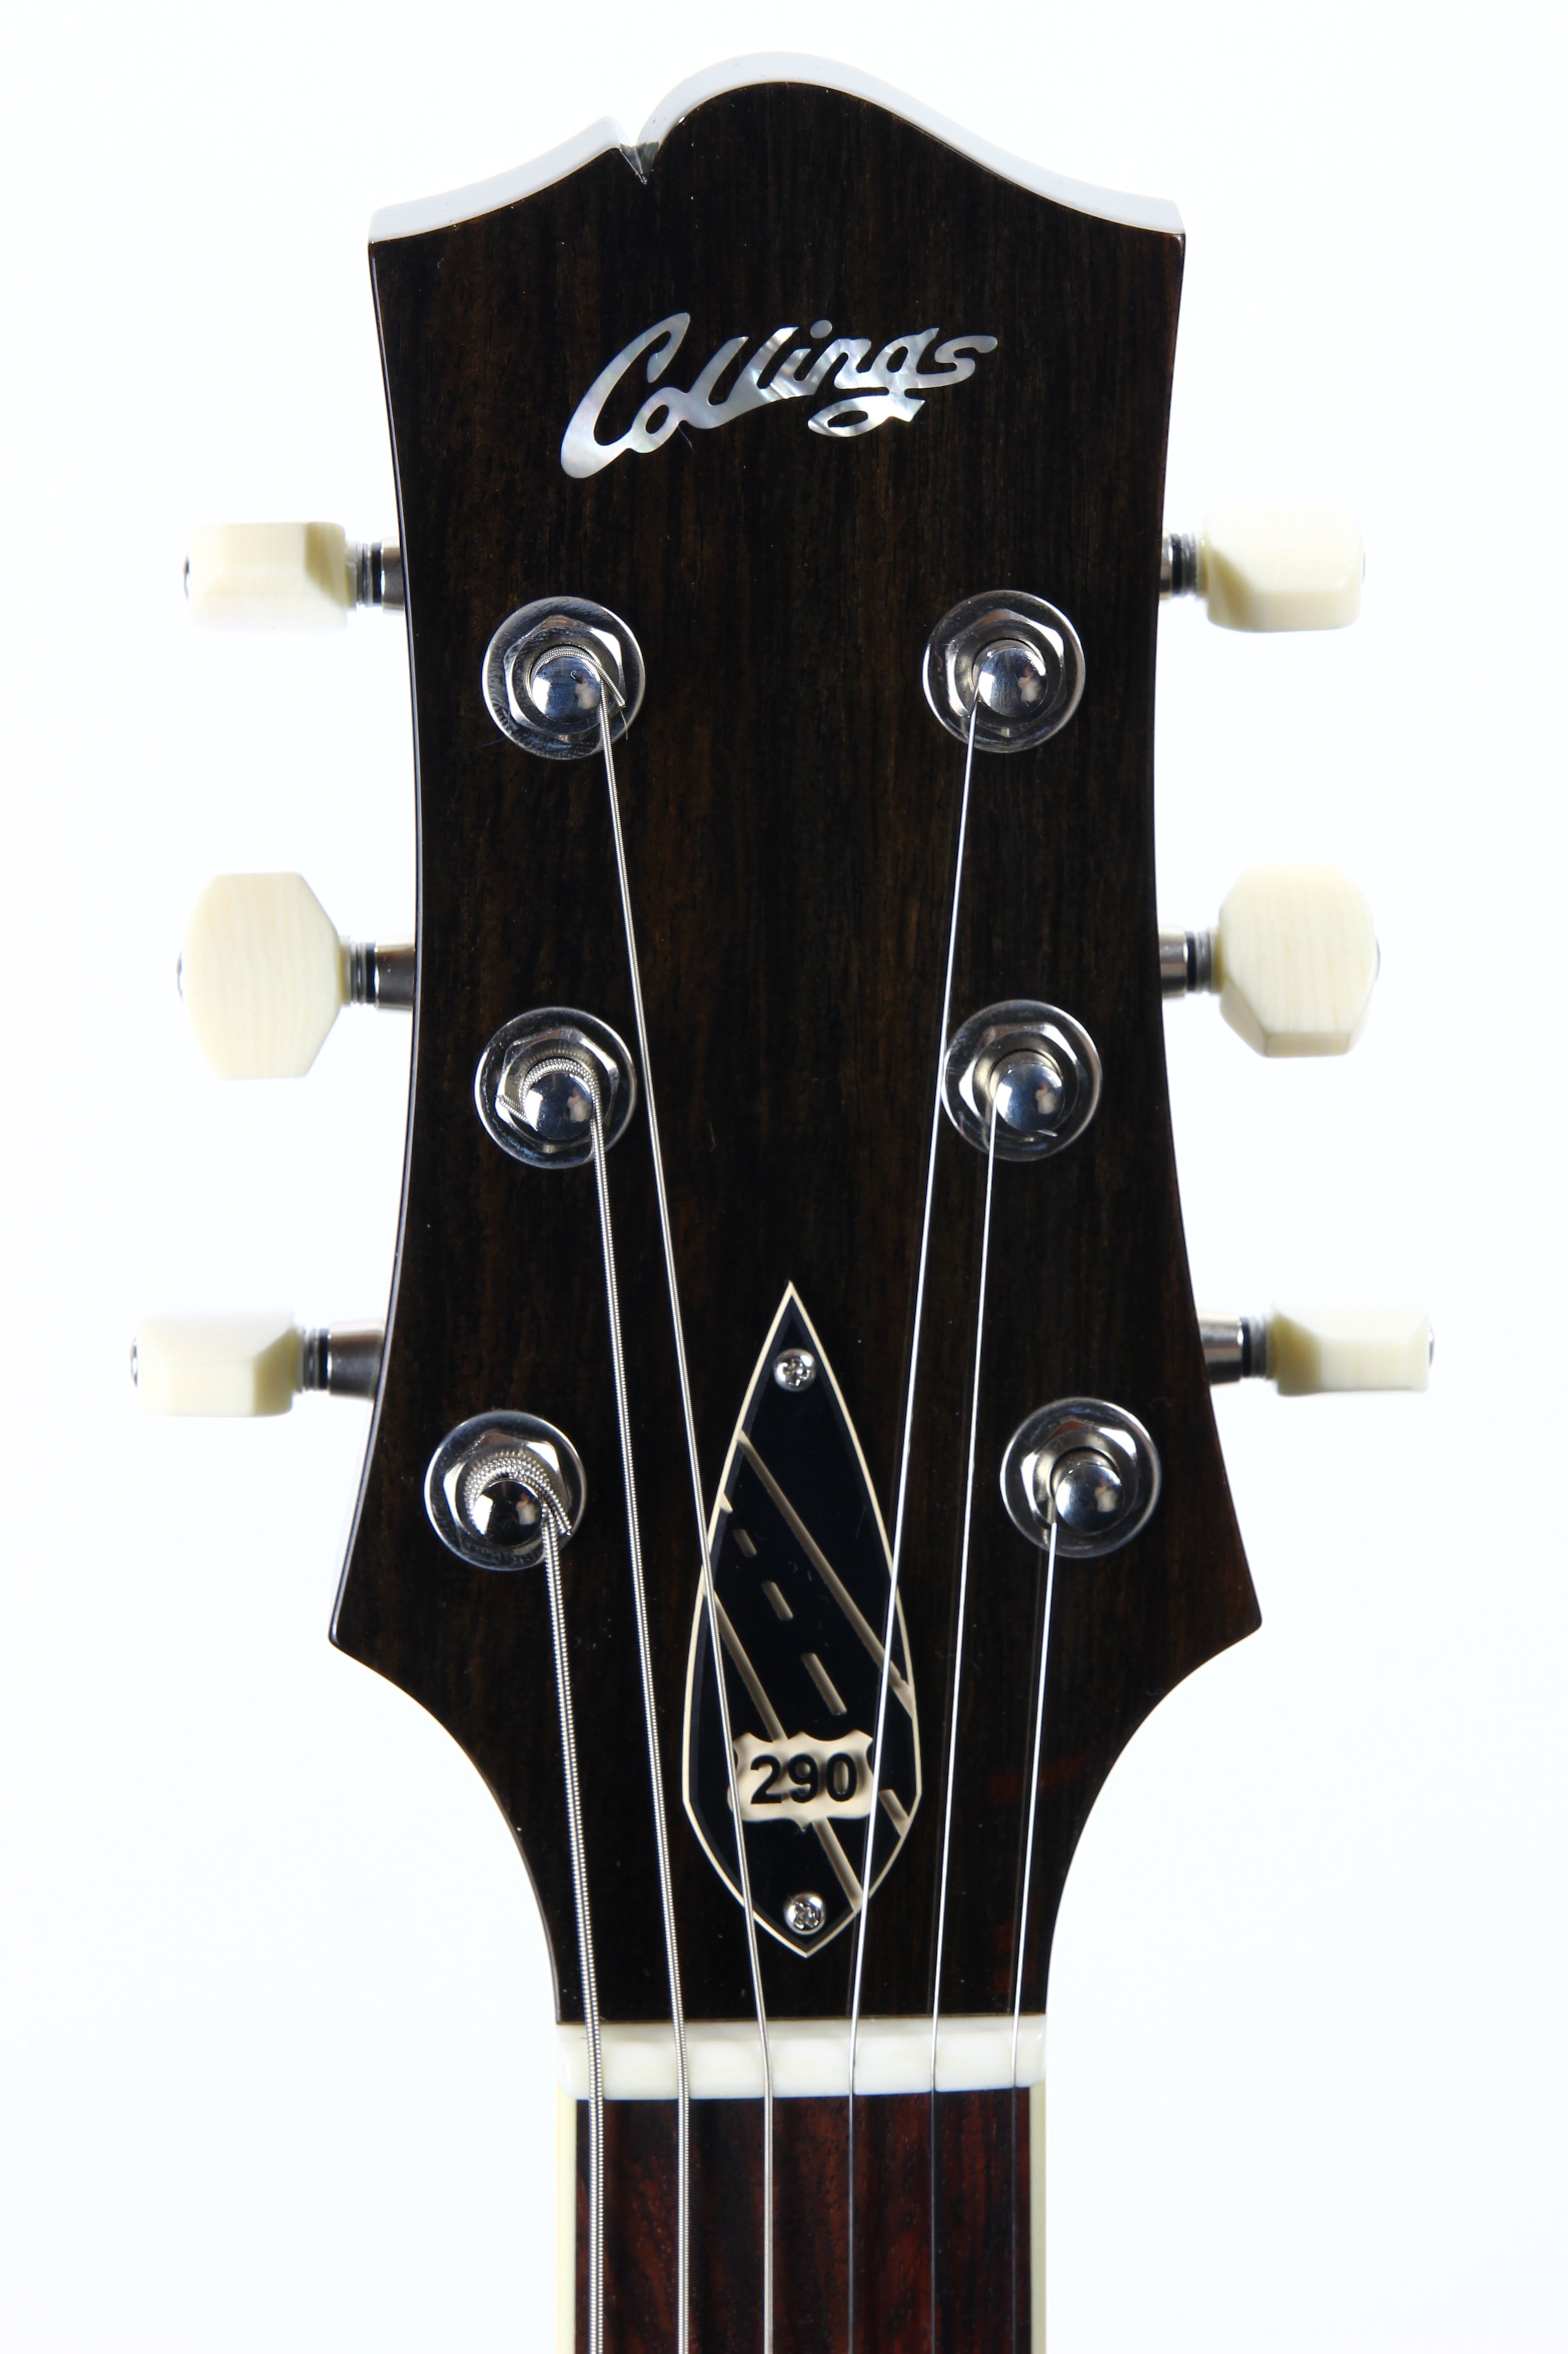 Collings headstock with brand logo